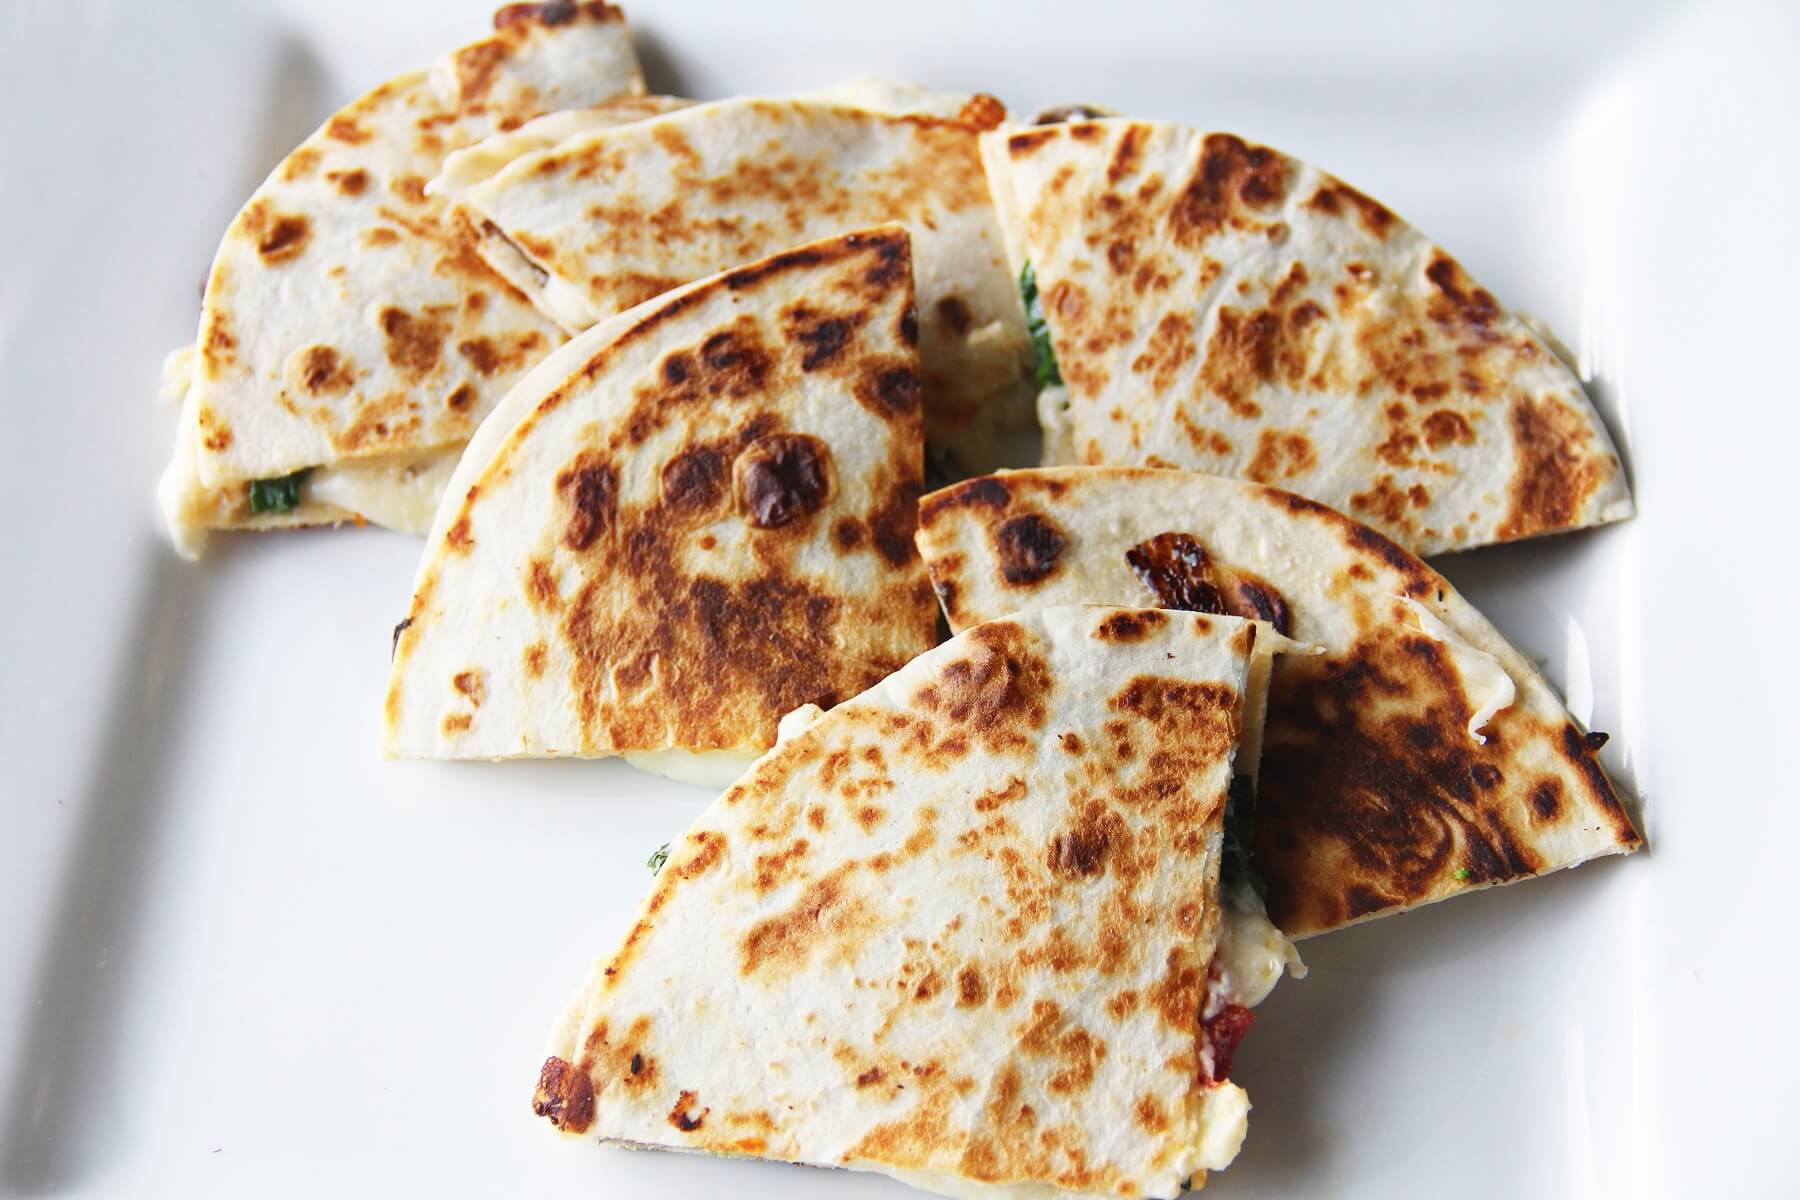 Spinach and Goats’ Cheese Picnic Quesadillas Recipe